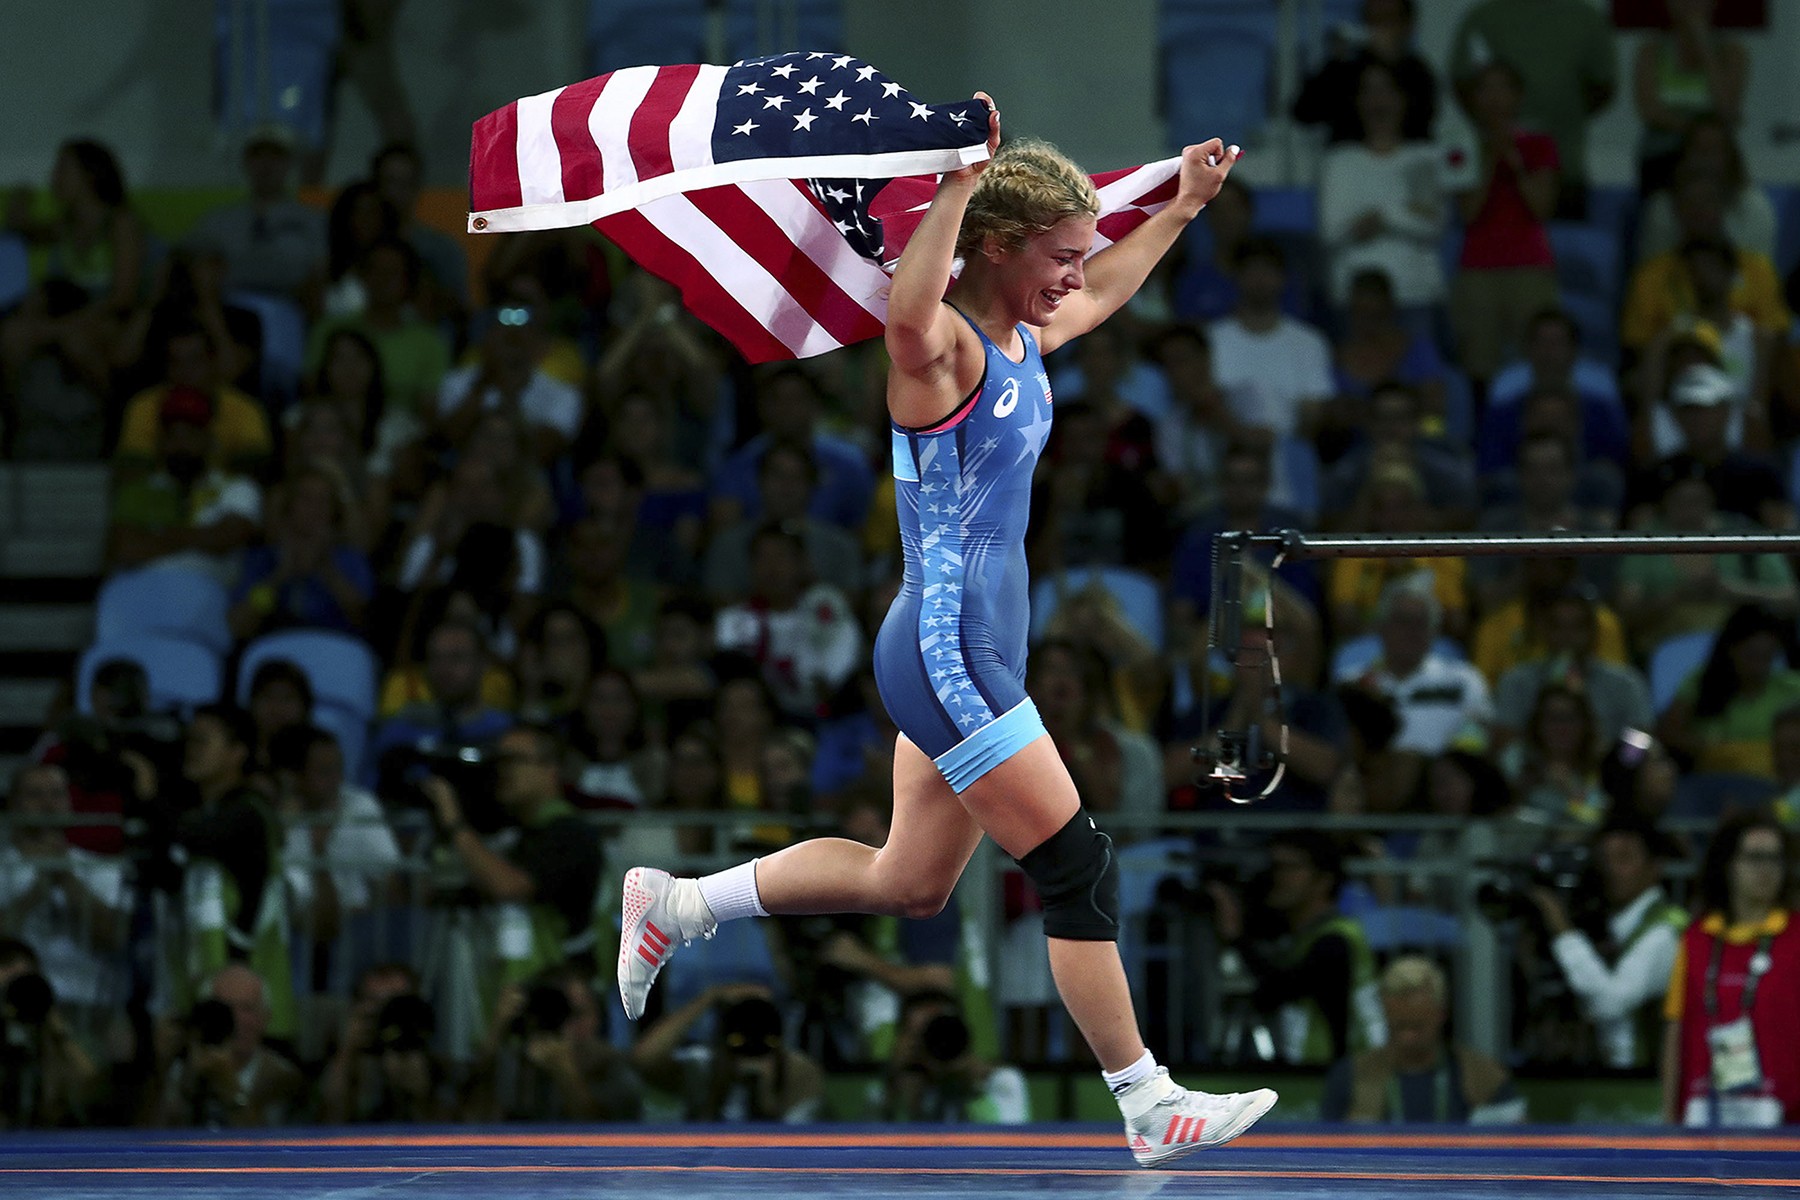 Helen Maroulis’ gold is a first